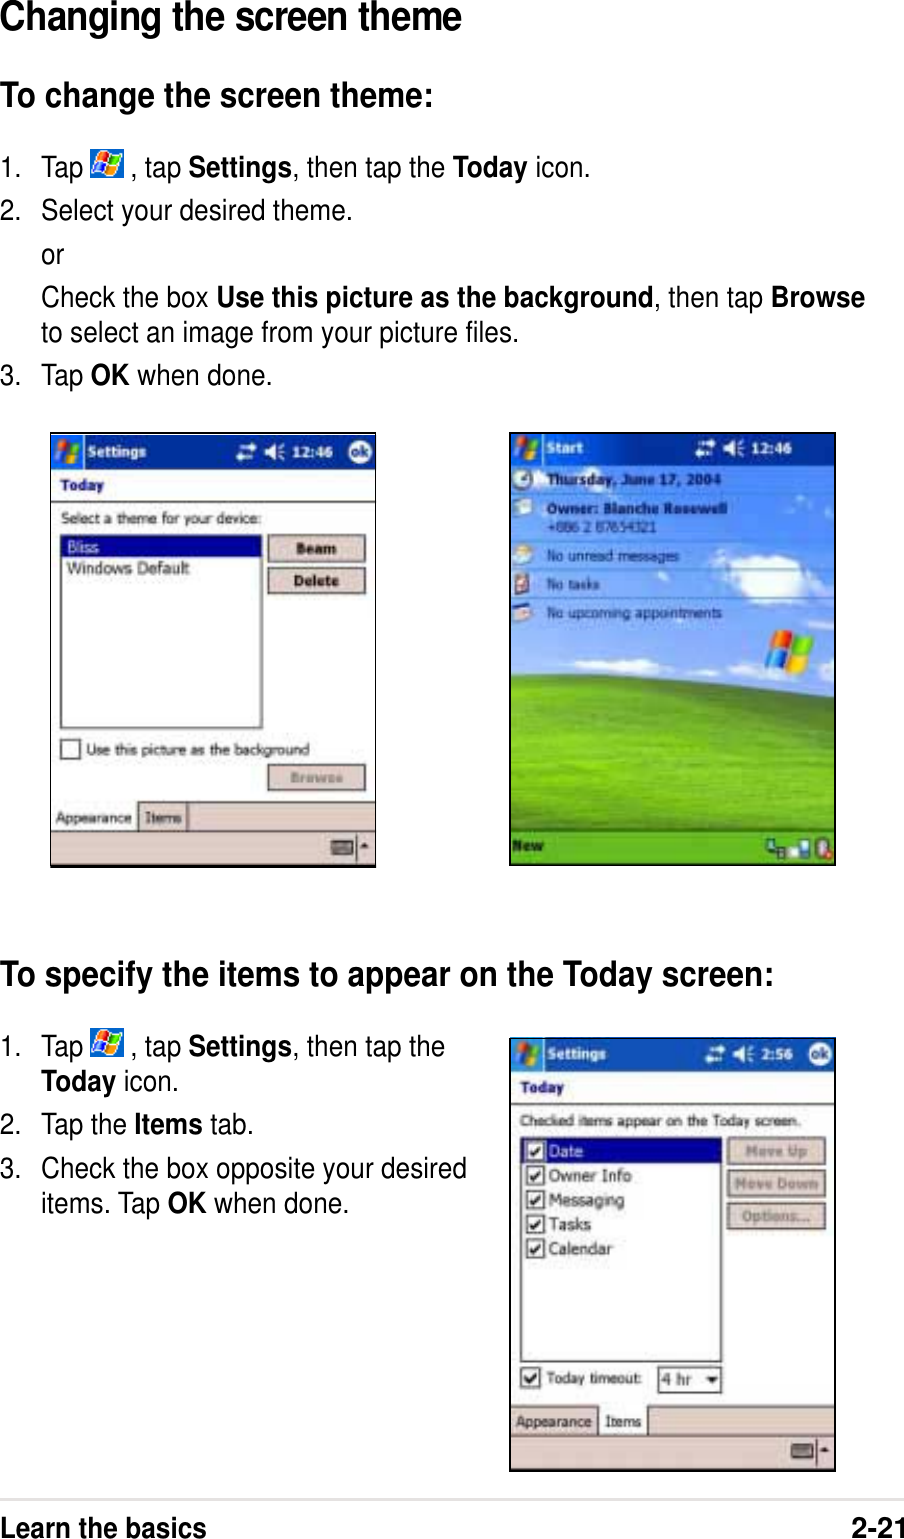 Learn the basics2-21Changing the screen themeTo change the screen theme:1. Tap   , tap Settings, then tap the Today icon.2. Select your desired theme.orCheck the box Use this picture as the background, then tap Browseto select an image from your picture files.3. Tap OK when done.To specify the items to appear on the Today screen:1. Tap   , tap Settings, then tap theToday icon.2. Tap the Items tab.3. Check the box opposite your desireditems. Tap OK when done.